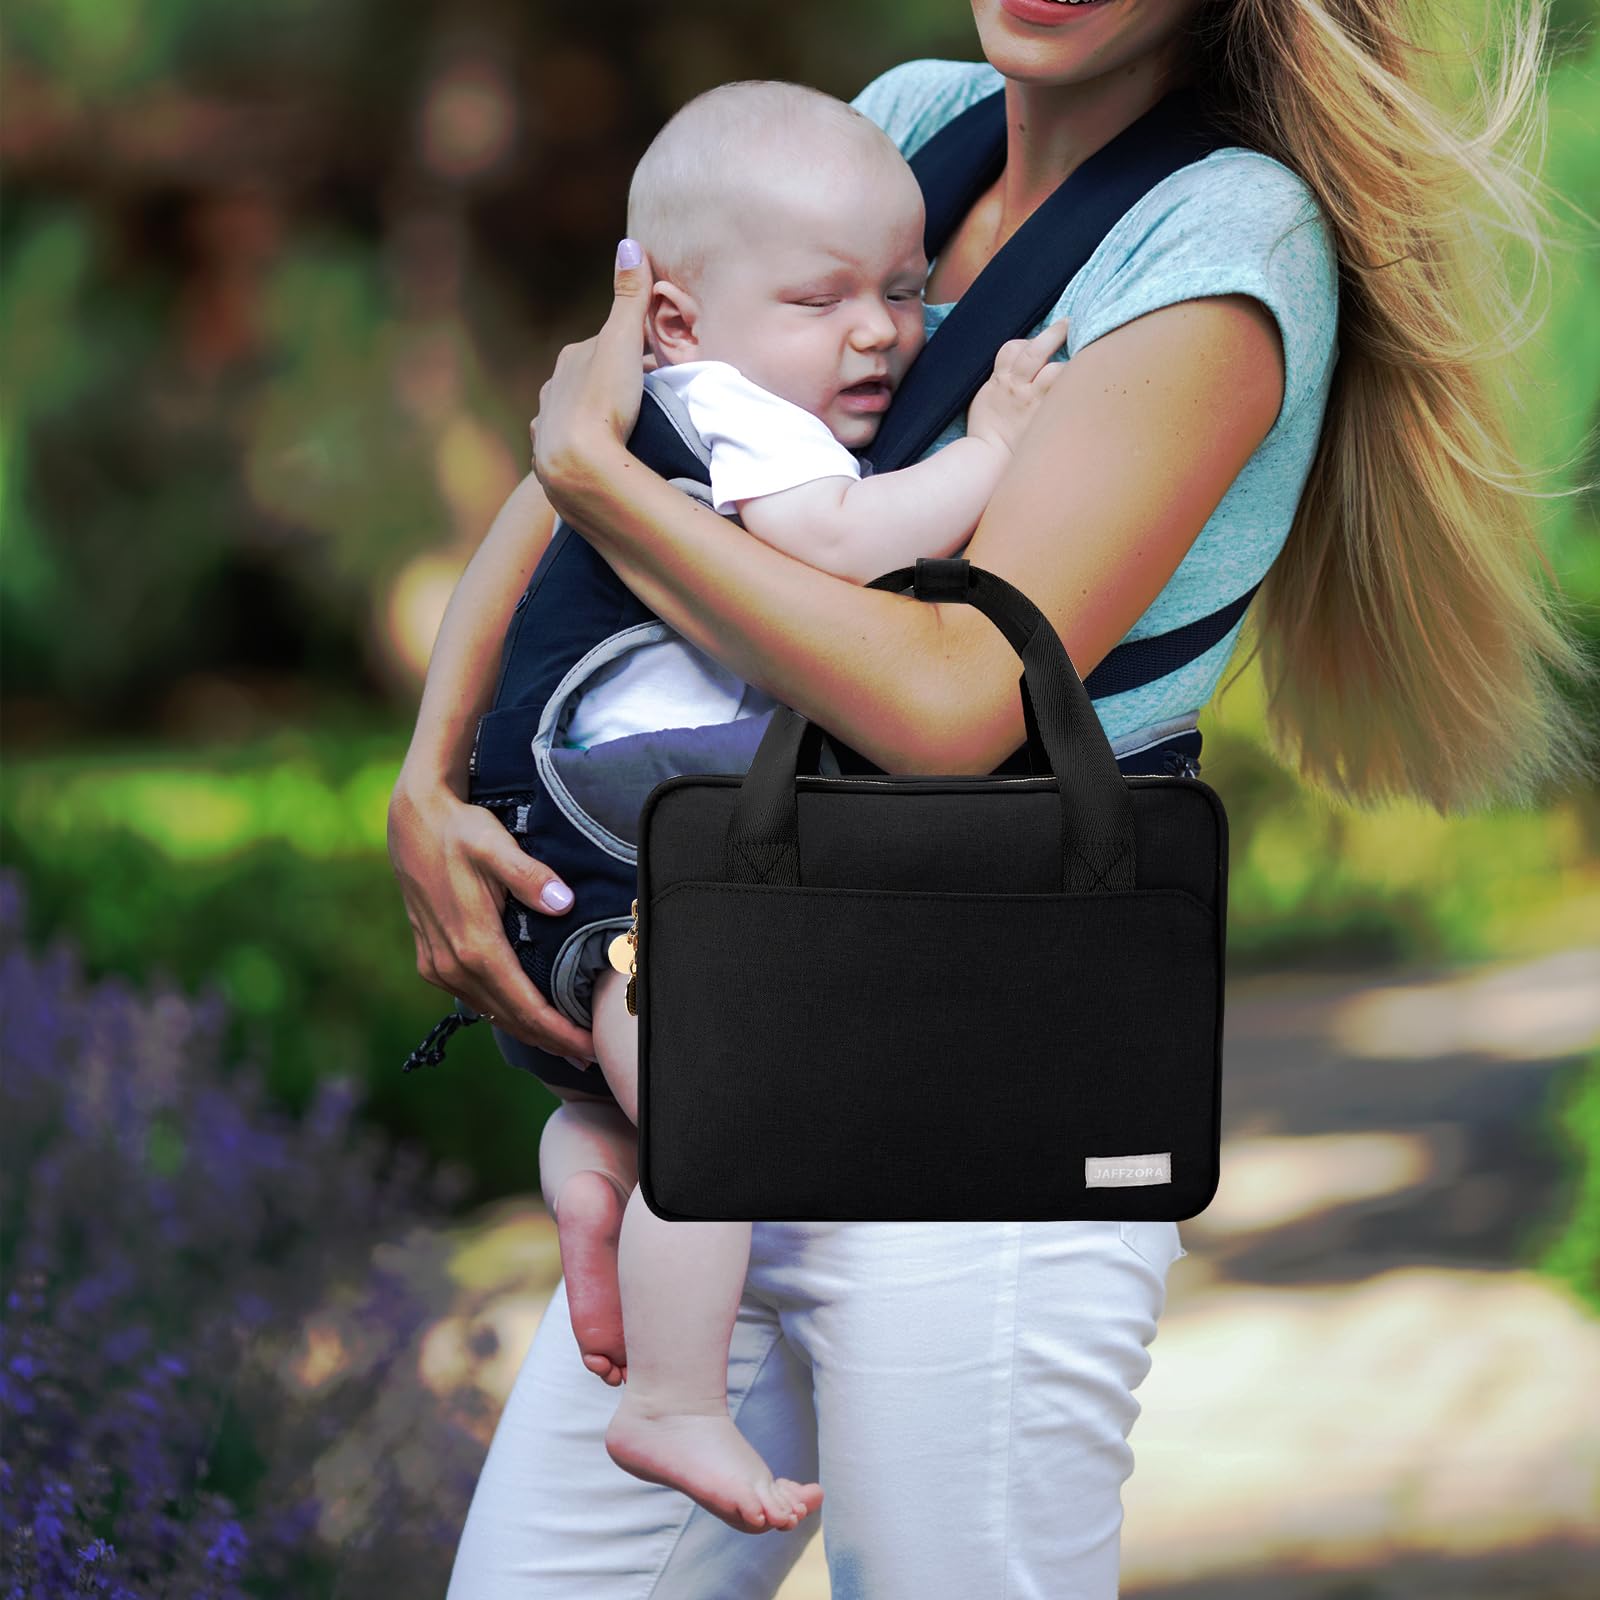 Wearable Breast Pump Bag with Cooler Compatible with Momcozy S12 Pro, Elvie & Medela Pump in Style, Carrying Case for Breast Pump and Accessories, Black(Bag Only)